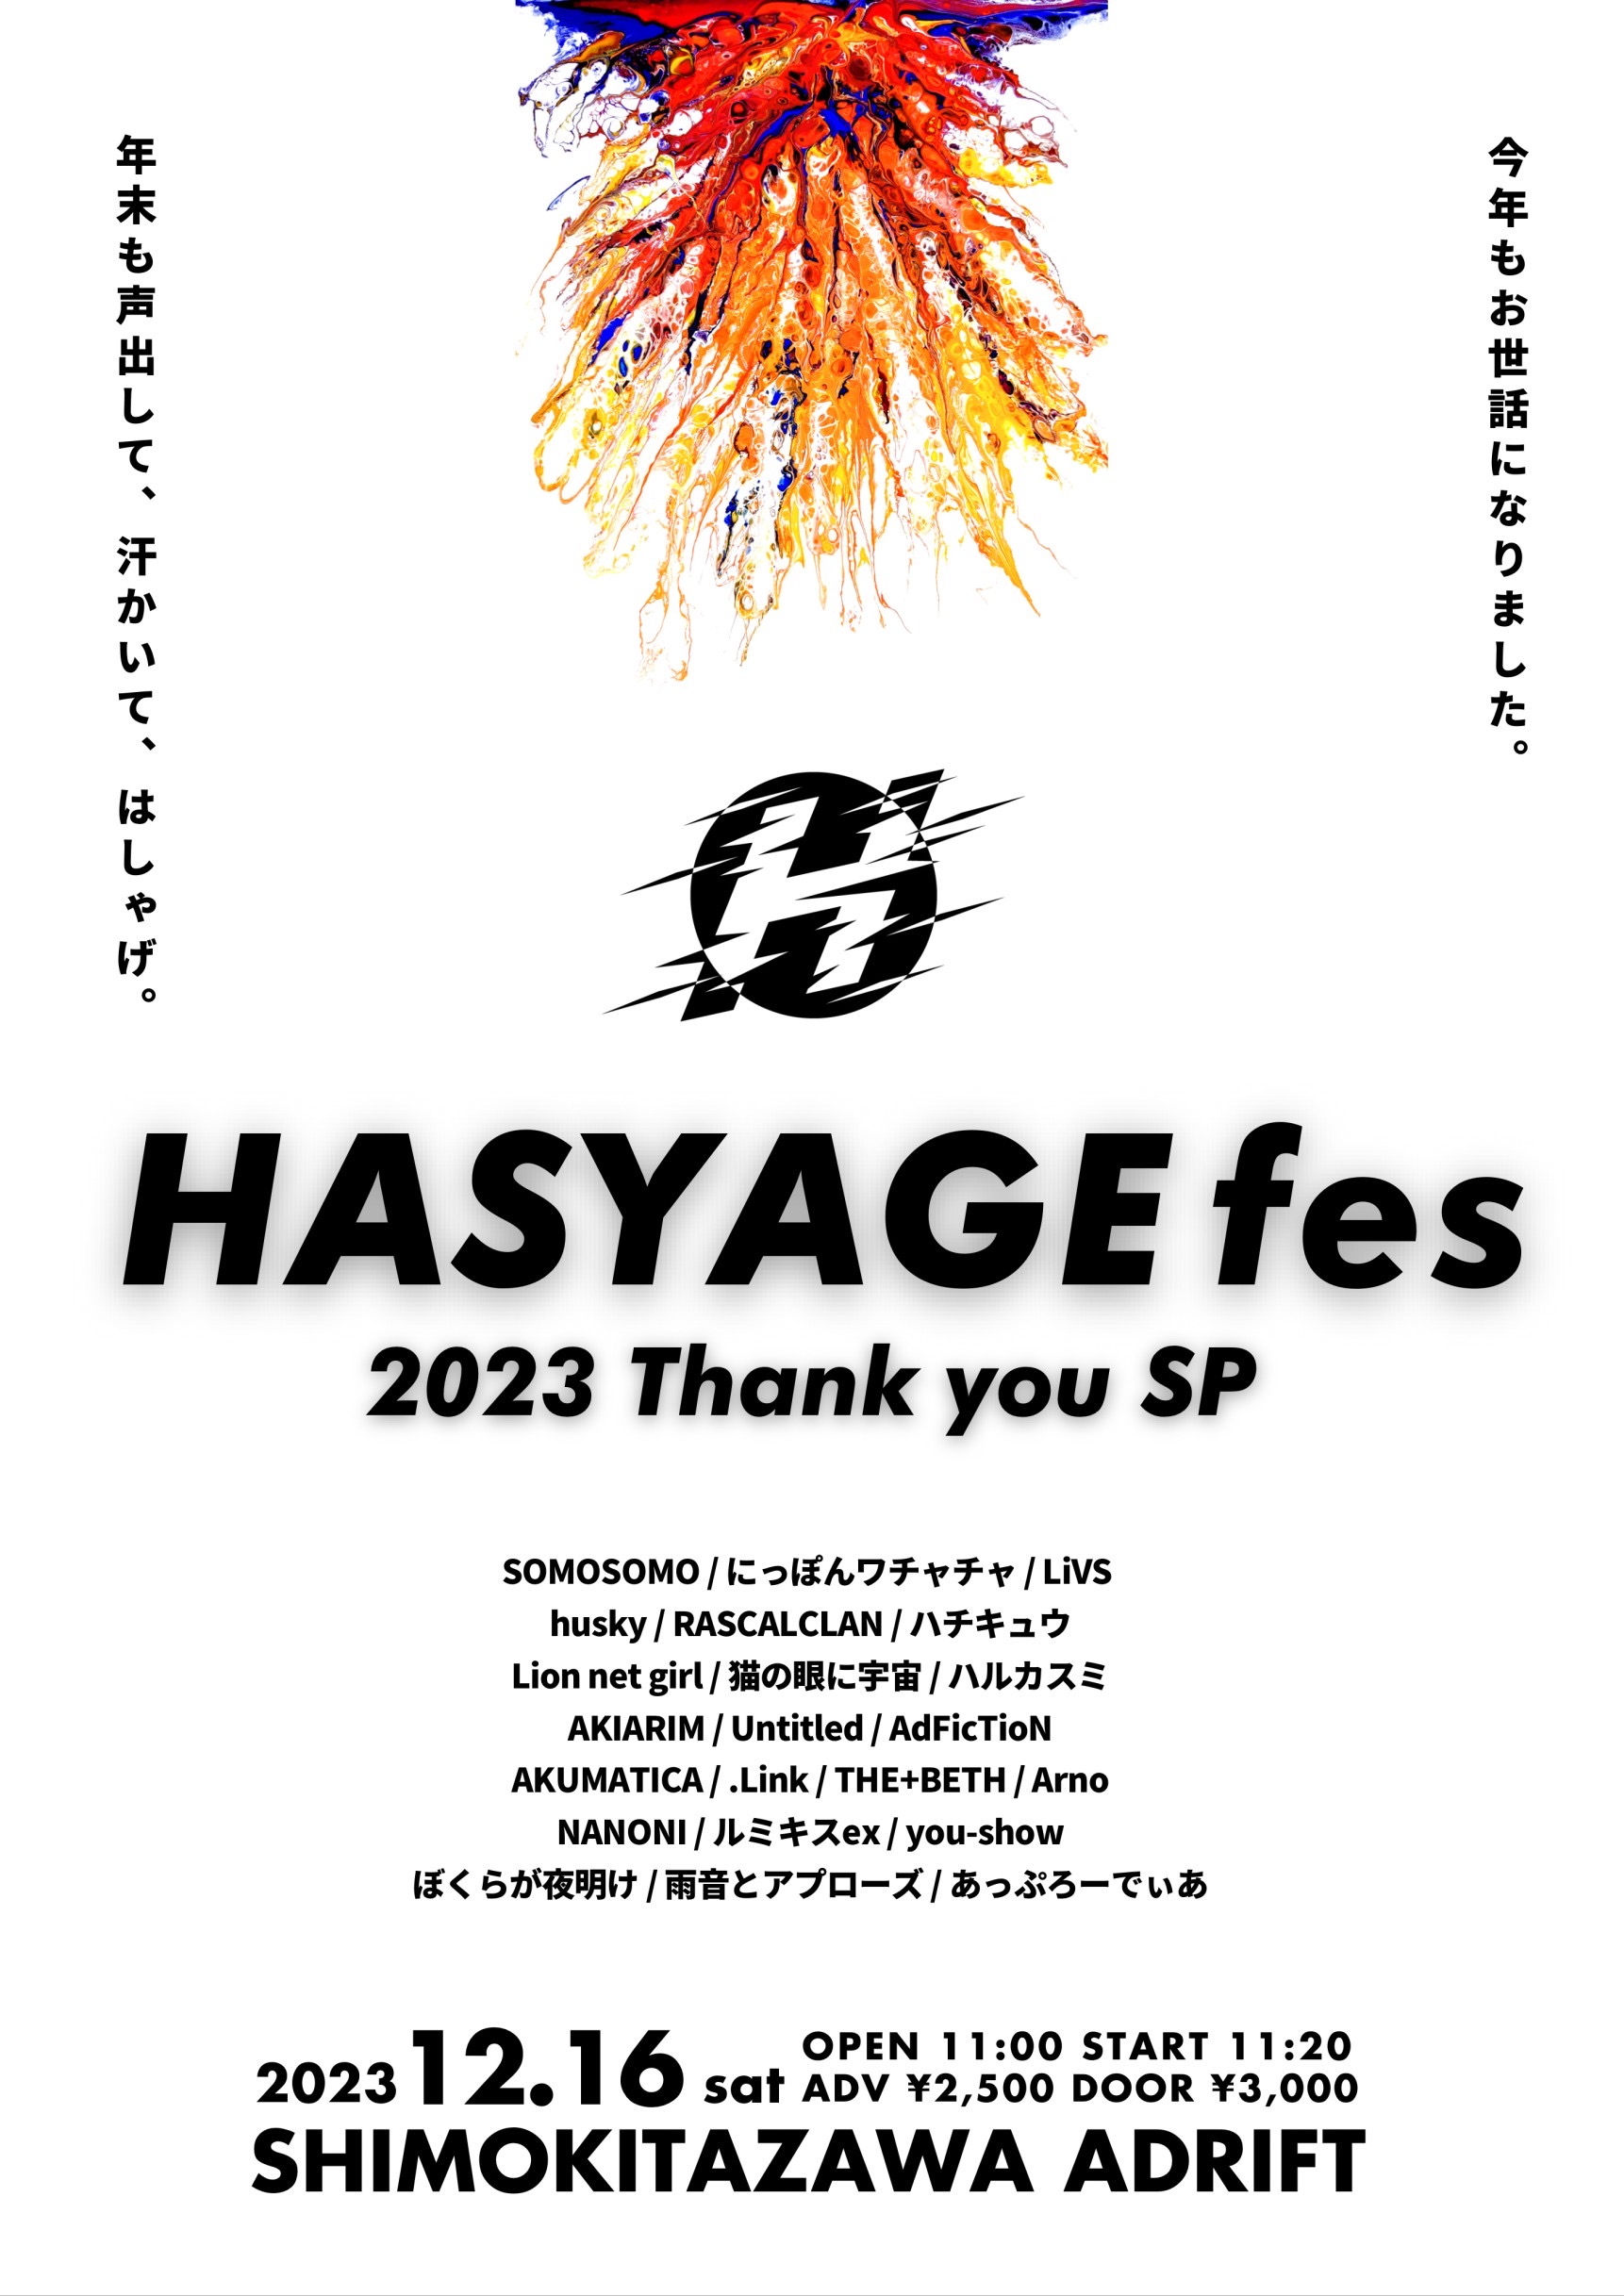 HASYAGE fes 2023 Thanks SP